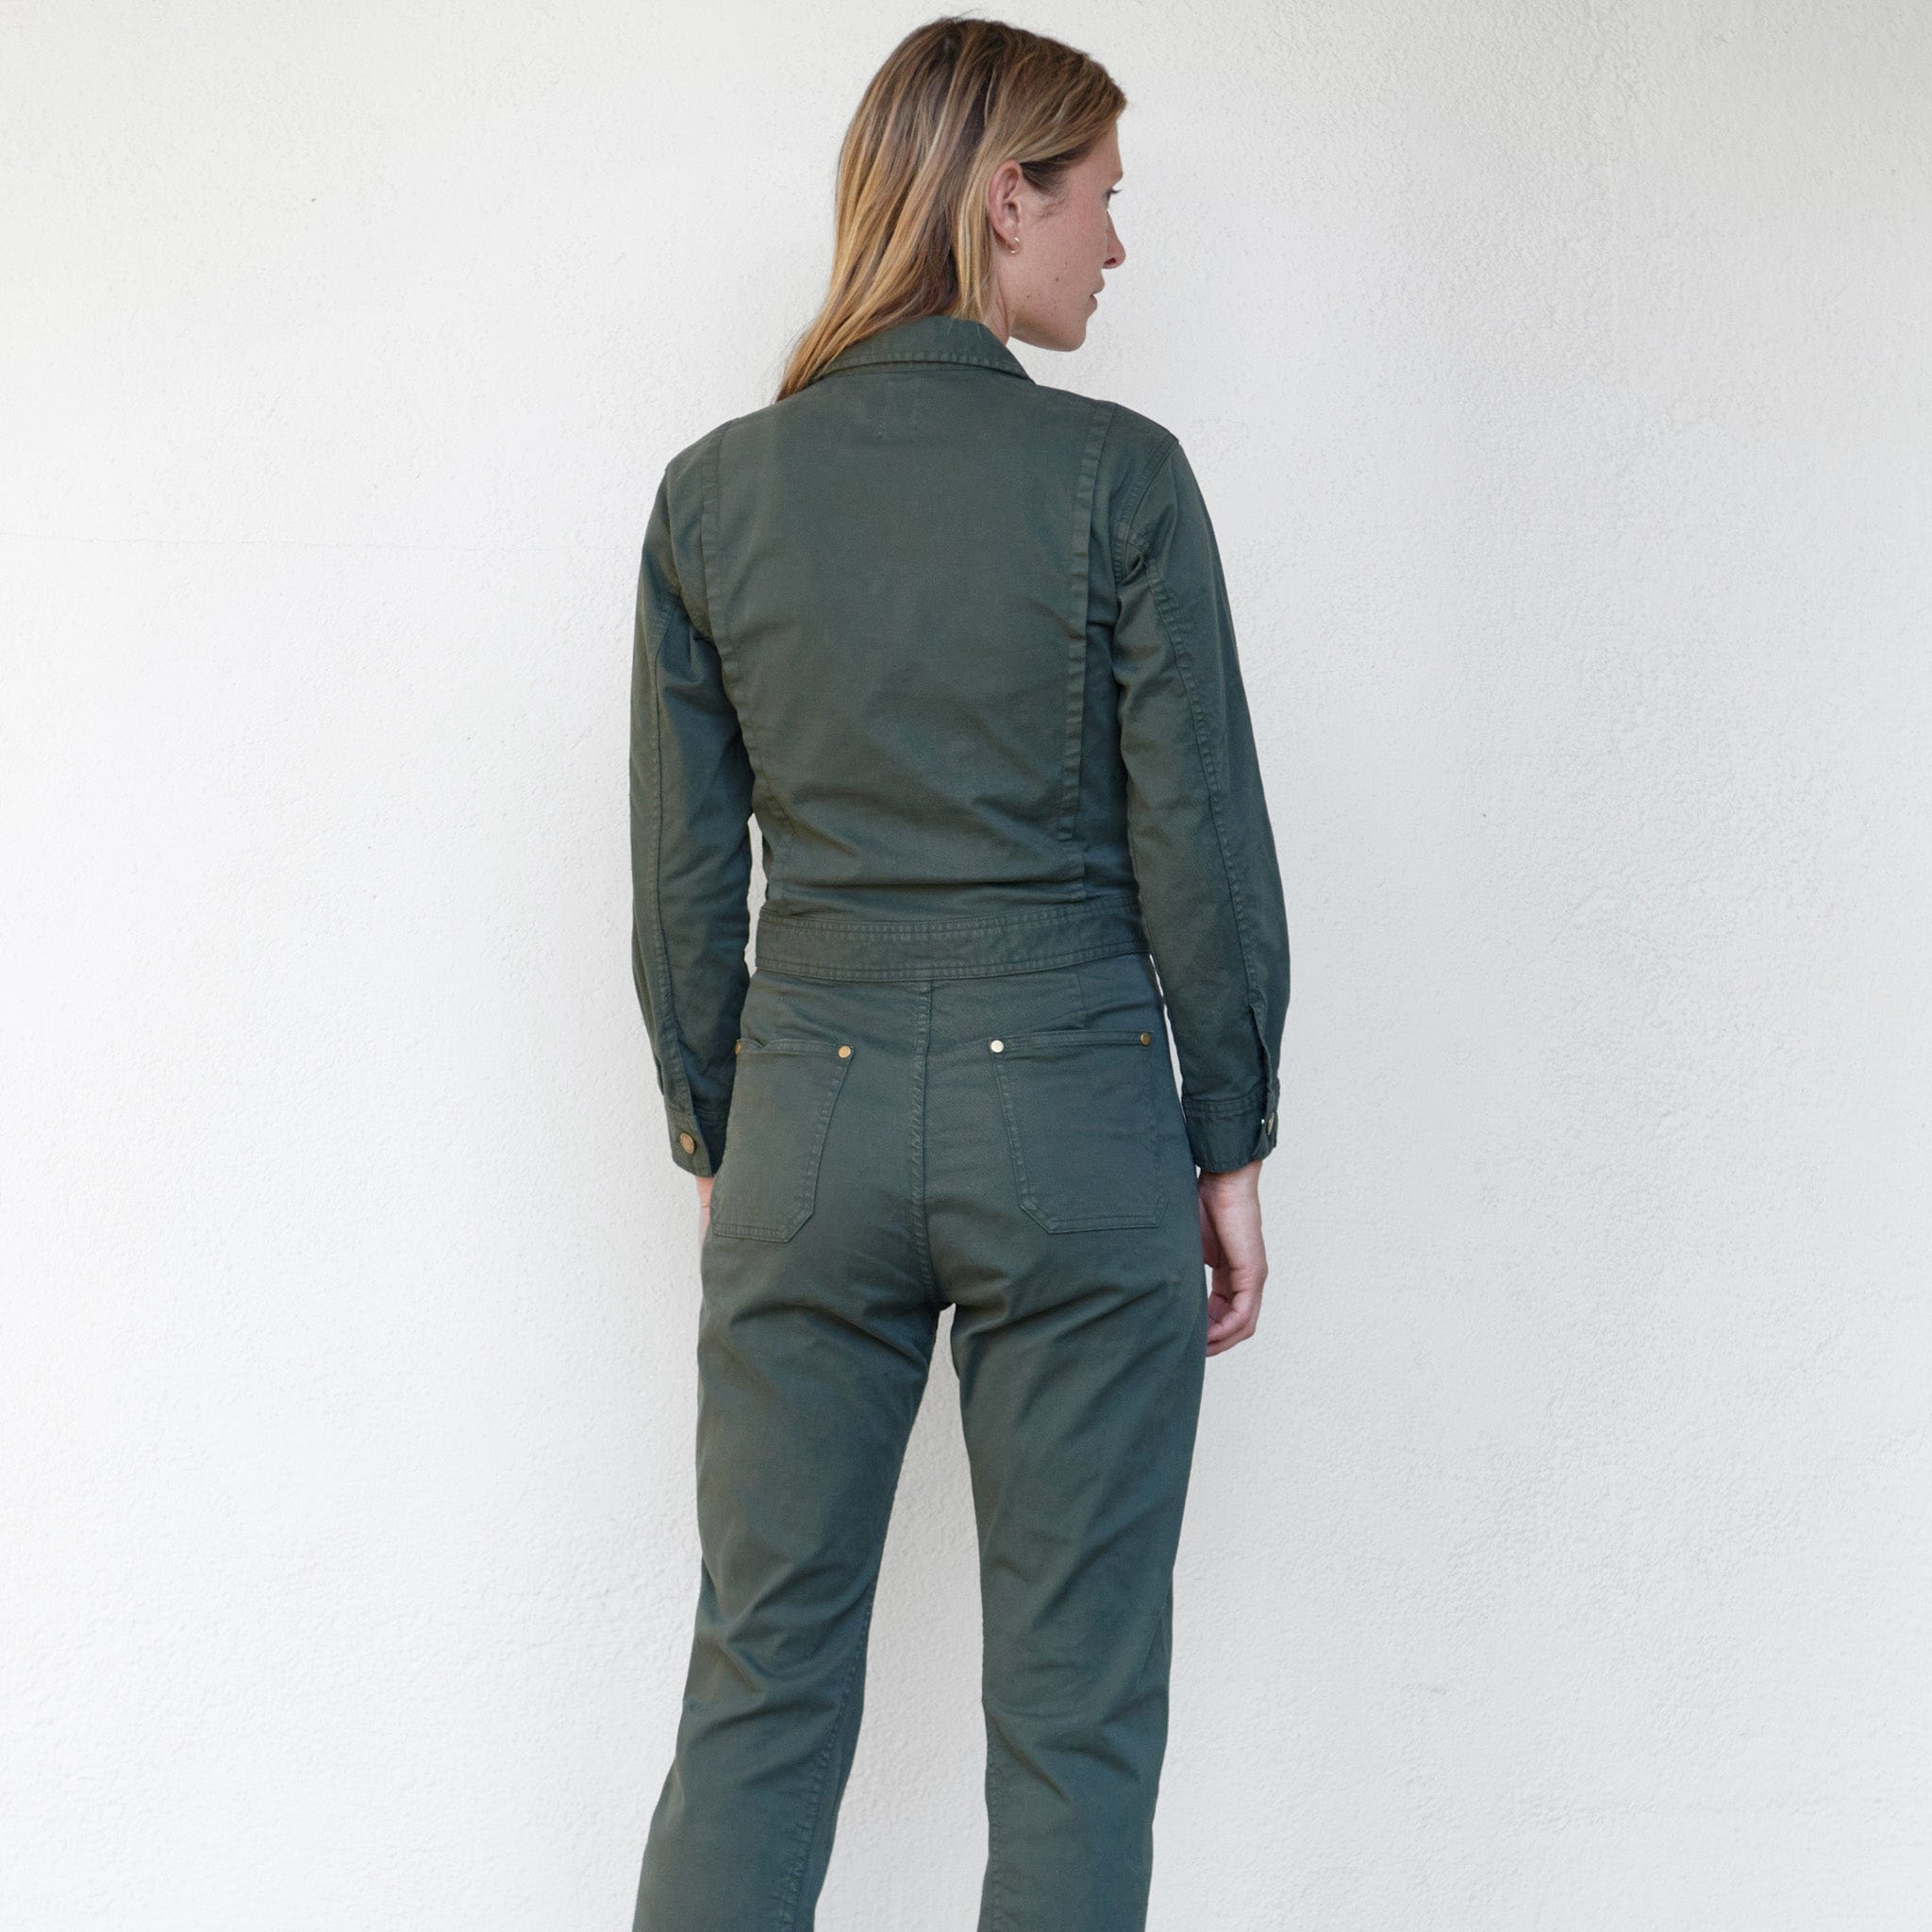 Only Jane Apparel Forest / 2 The Only Jane Jumpsuit